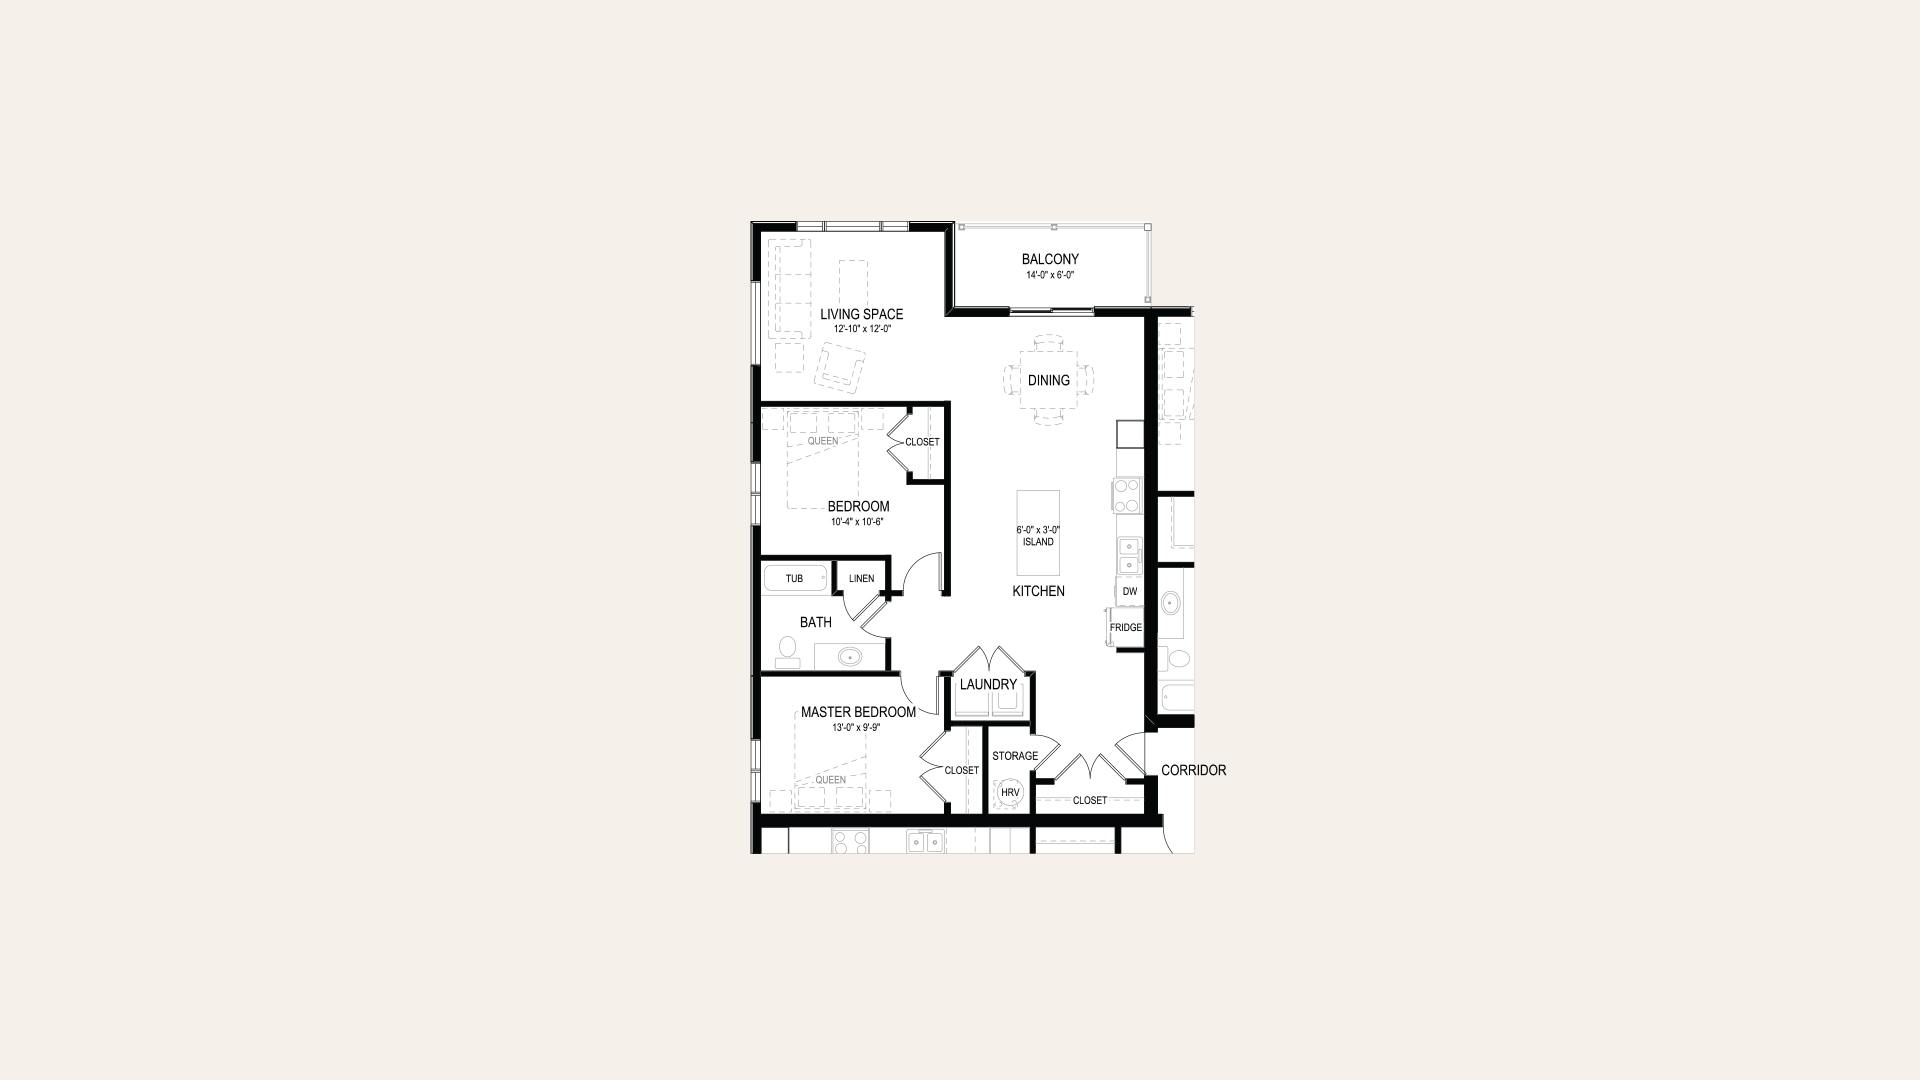 Floor plan of apartment A in Building B. Two bedrooms, one bathroom, laundry closet, balcony, and an open concept kitchen and living room.